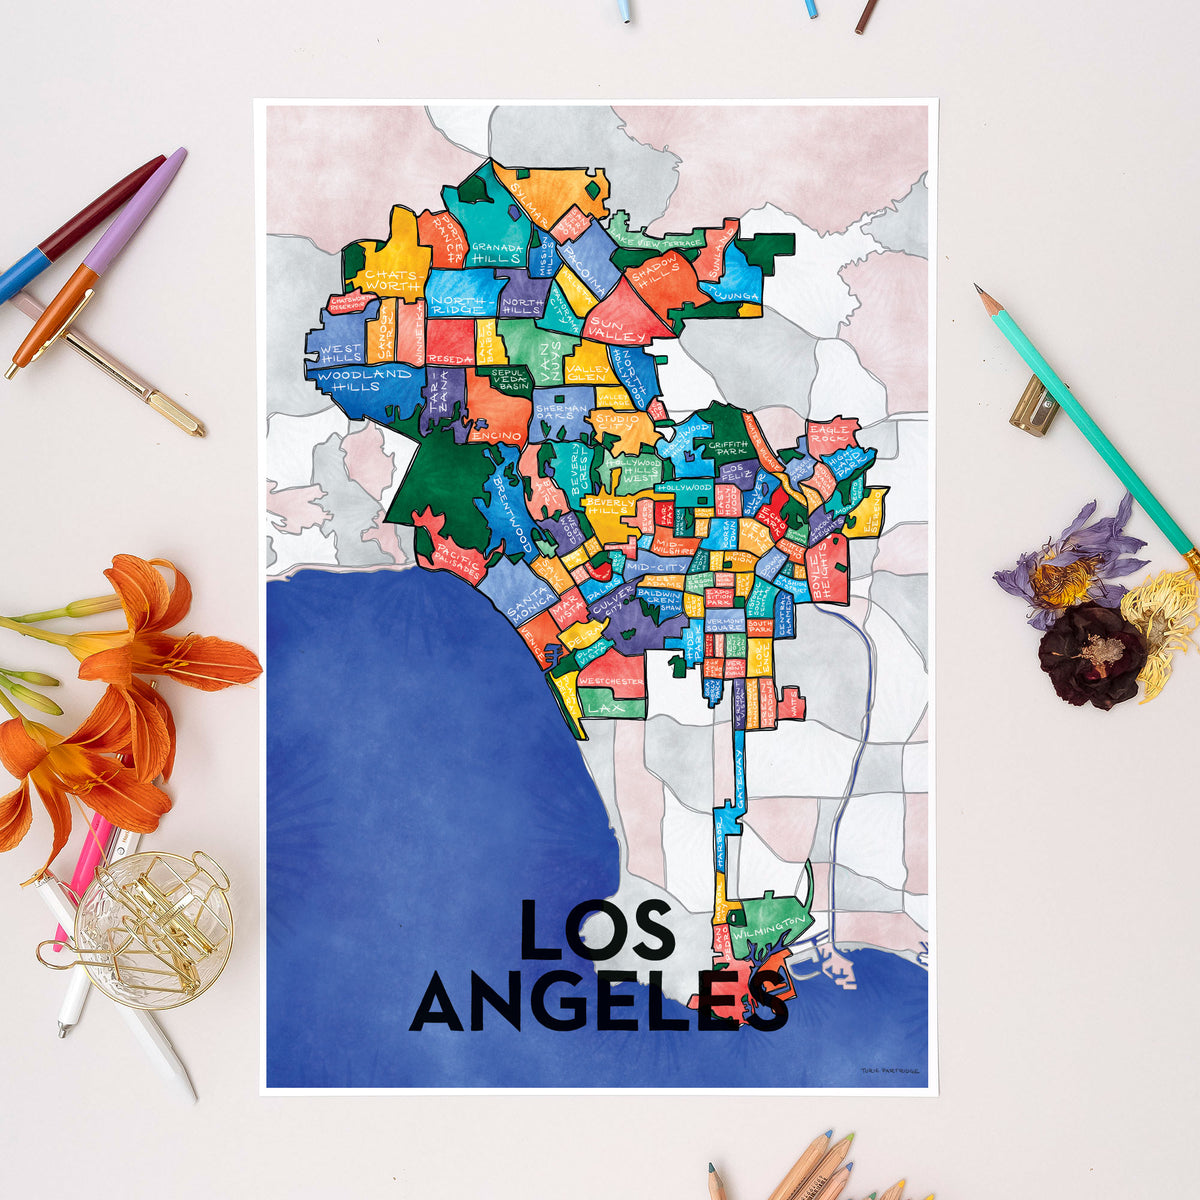 Postcards of L.A. neighborhoods that are definitely not cities